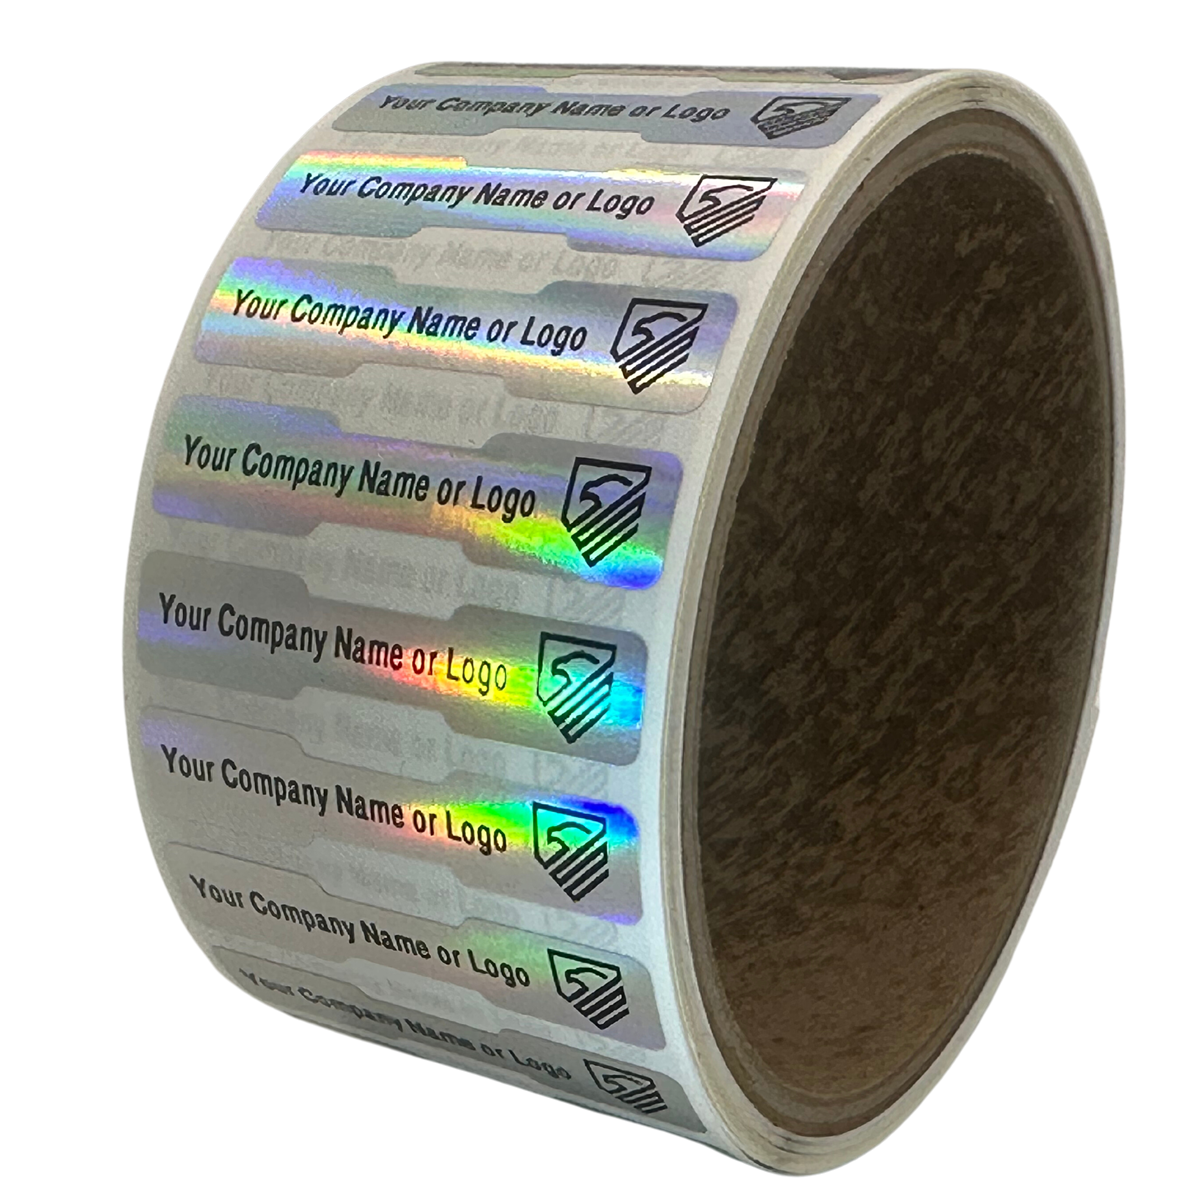 10,000 Non Residue Holographic Rainbow Finish Tamper-Evident Stickers TamperGuard® Security Label Seal, Dogbone Shape Size 1.75" x 0.375 (44mm x 9mm) >Click on item details to customize.